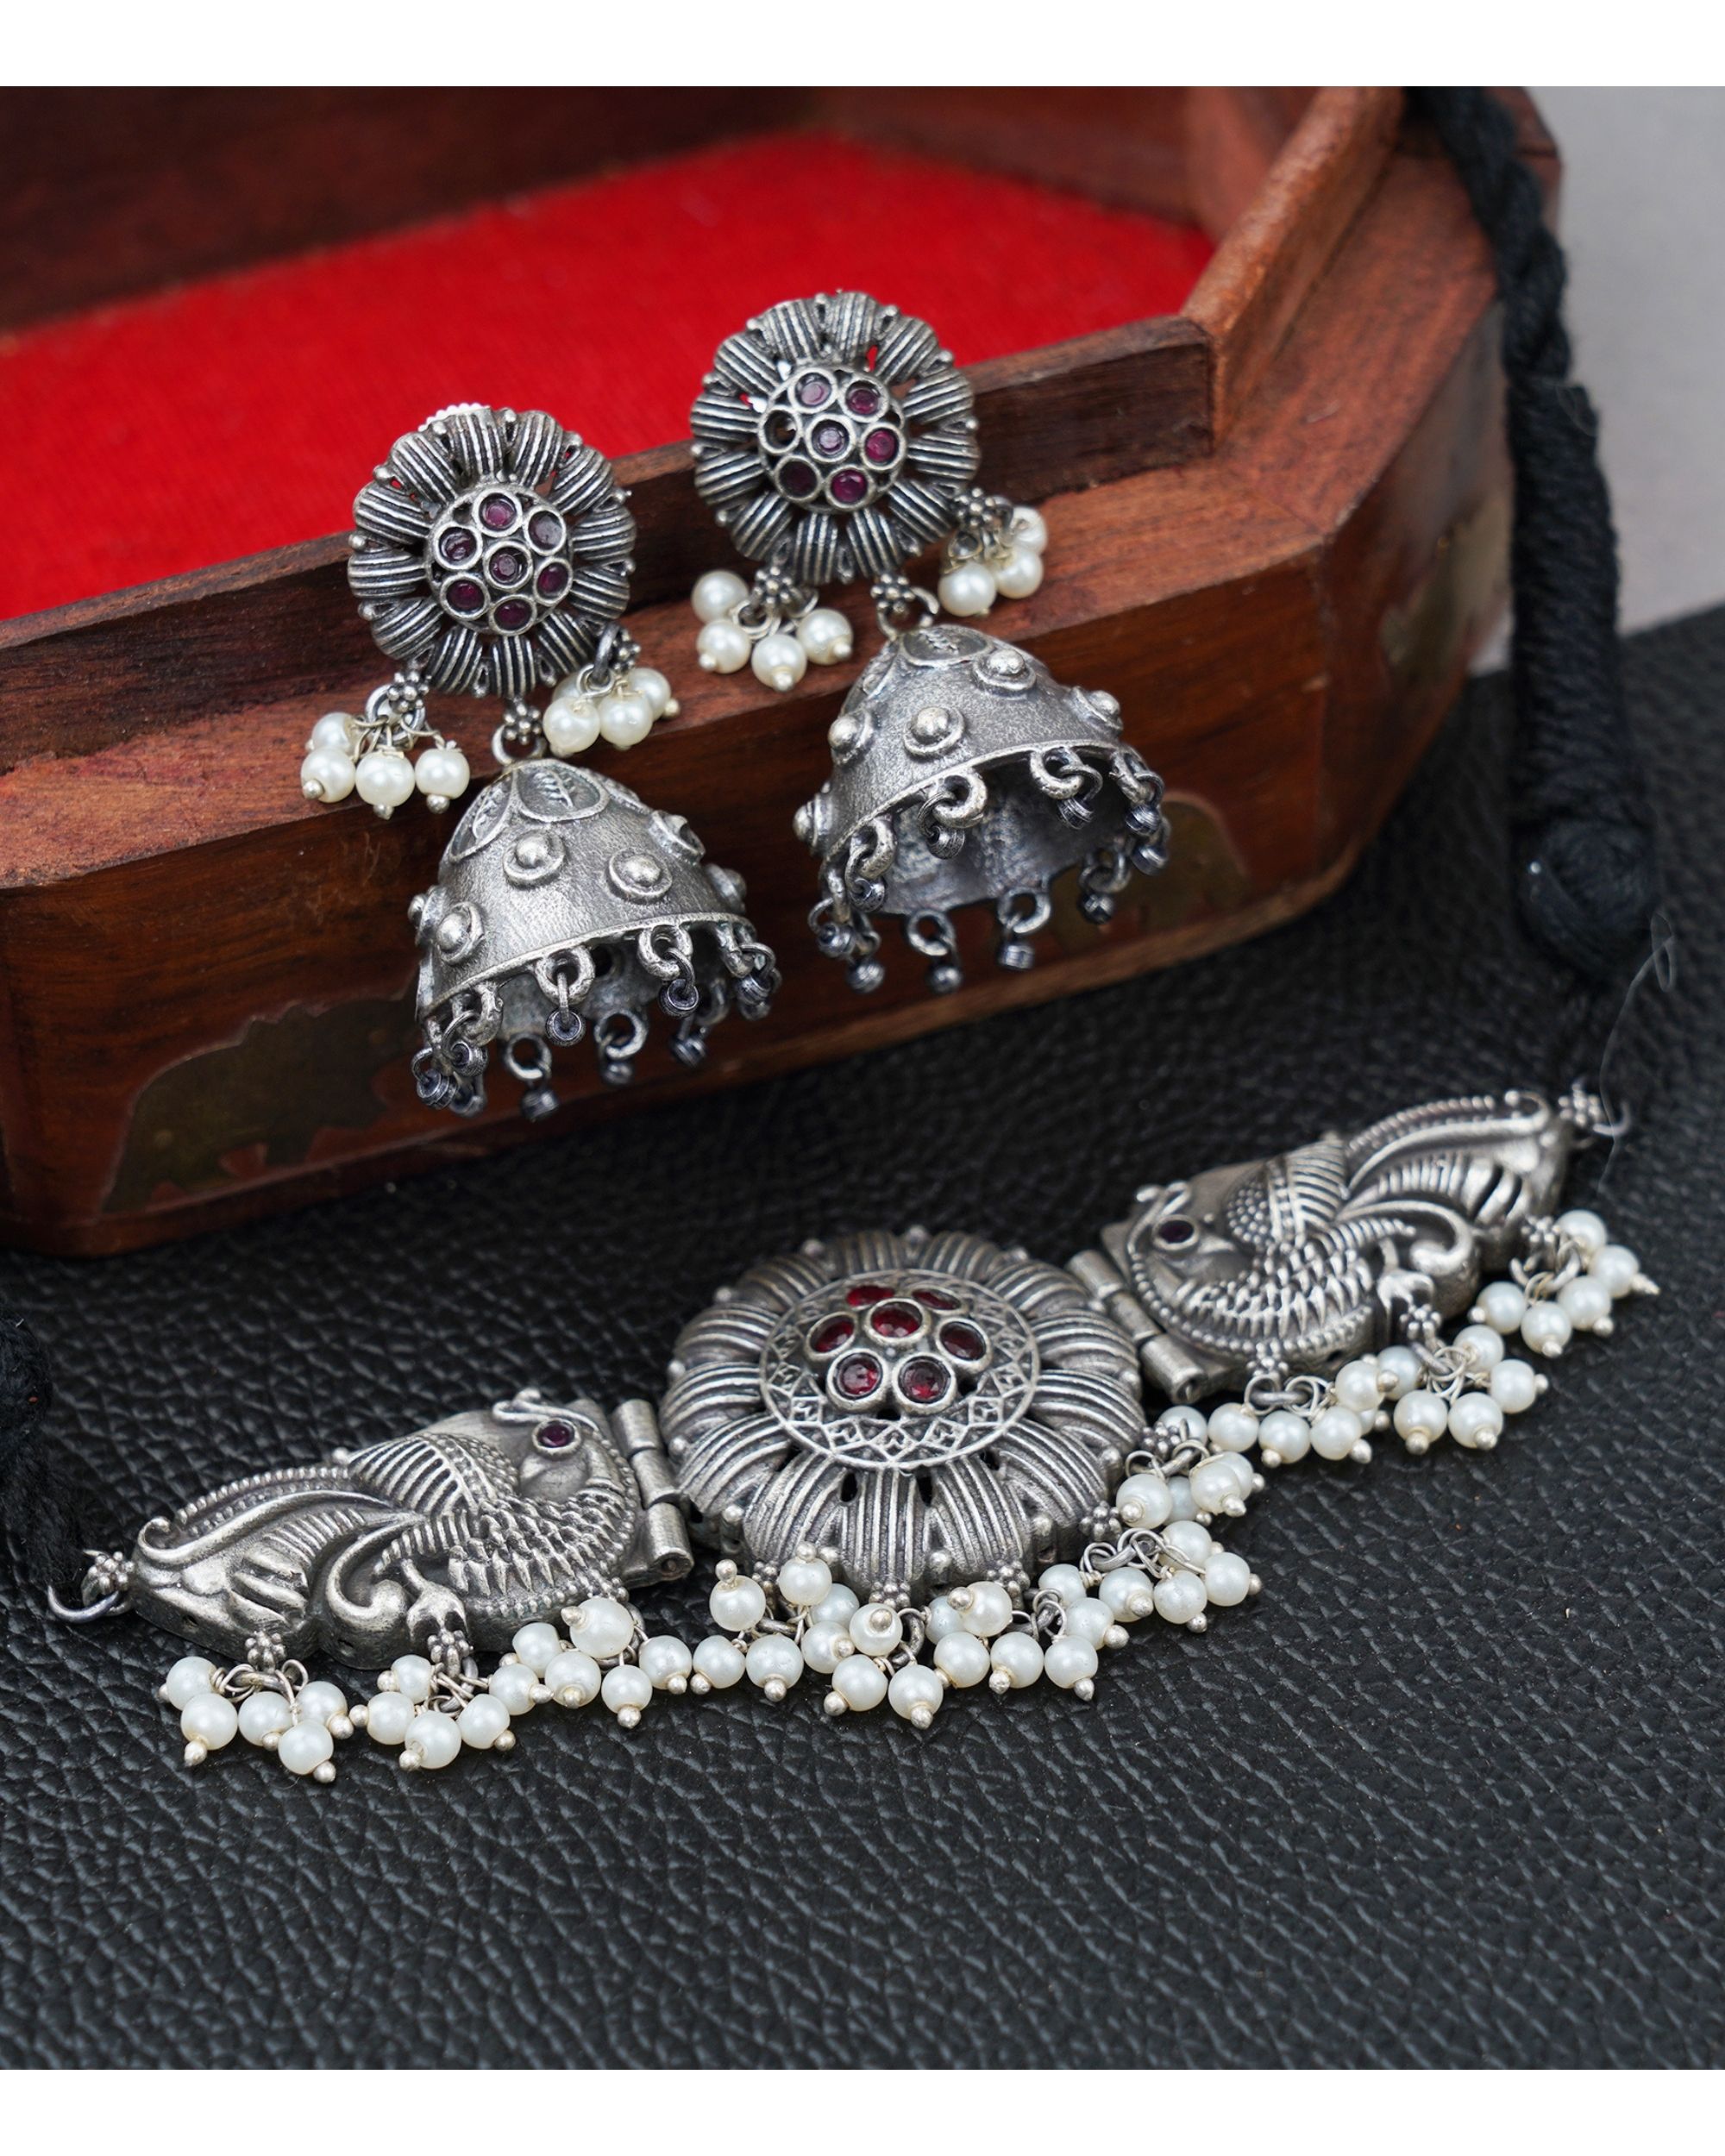 Dual peacock engraved neckpiece with earrings - set of two